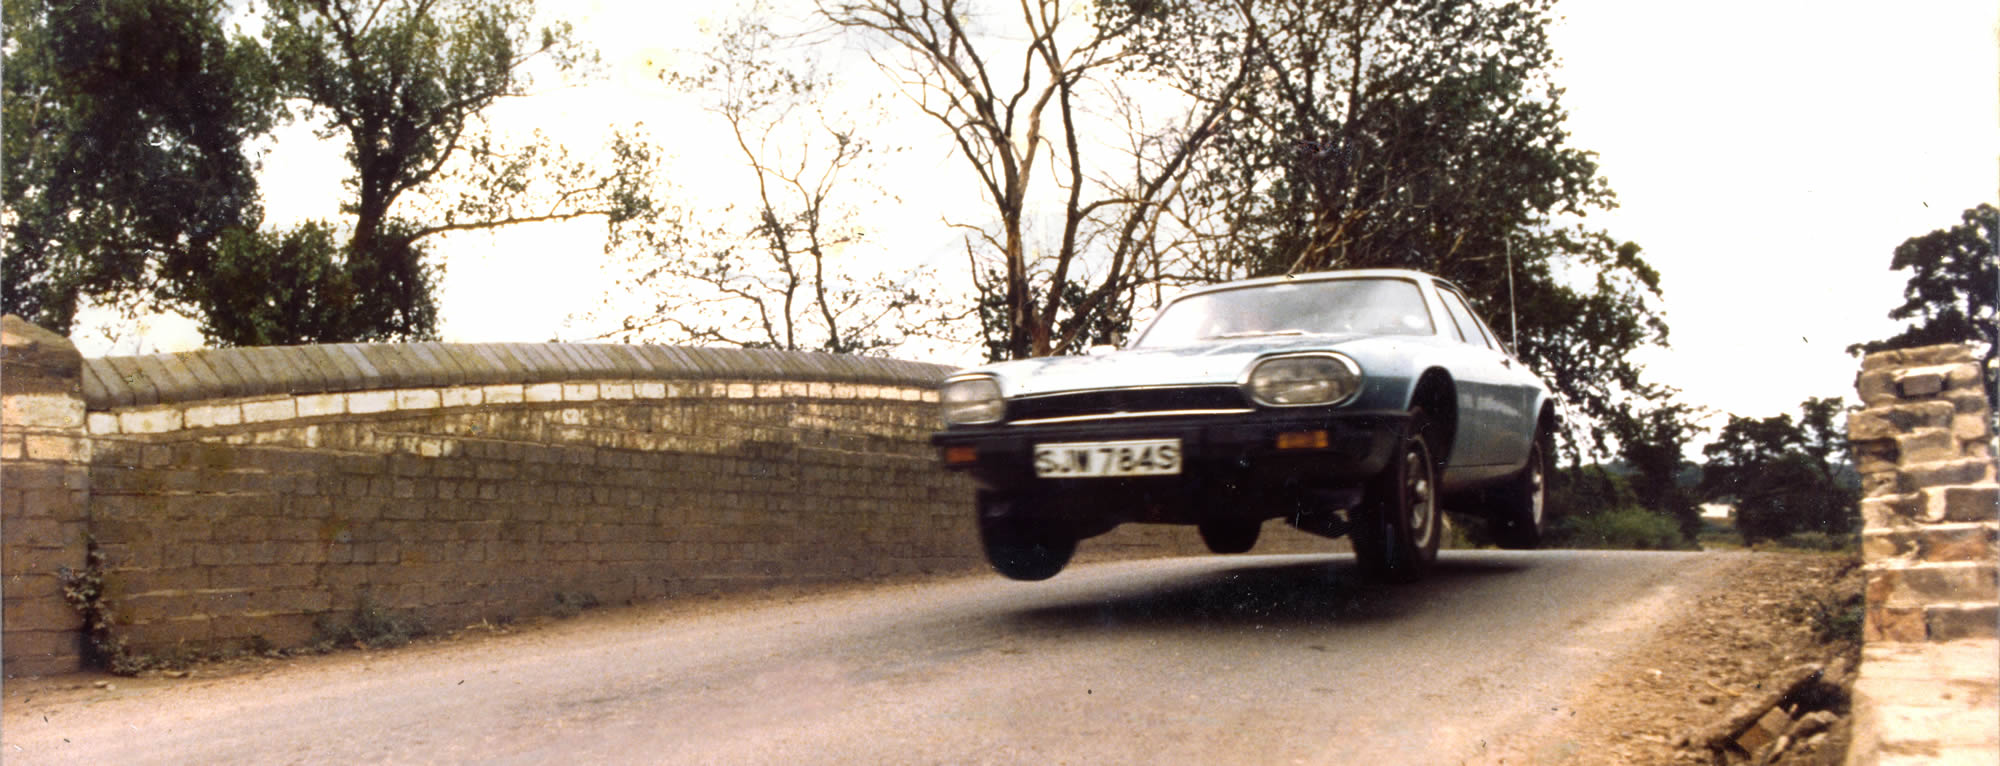 Leaping XJ-S 1978